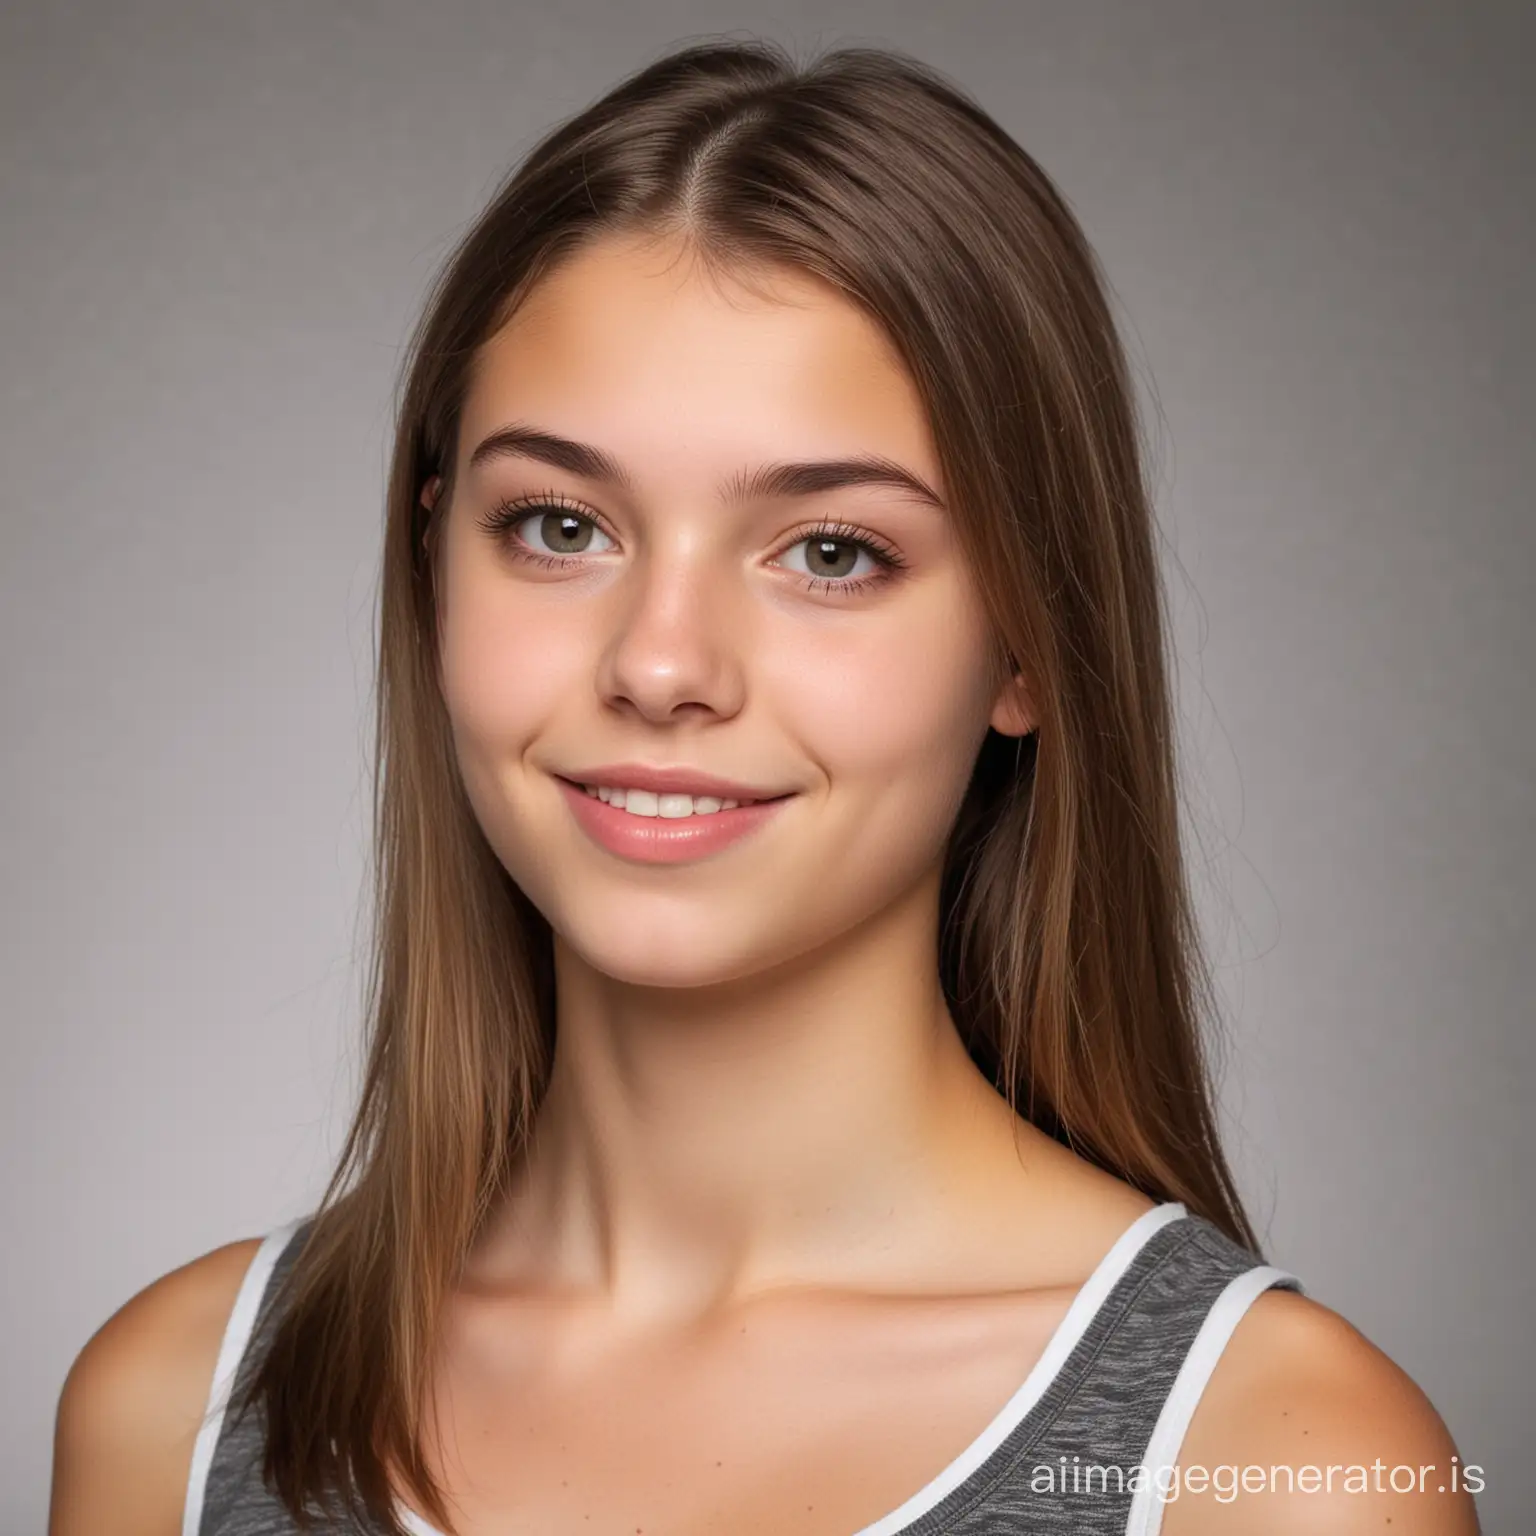 Young-Teen-Female-with-Enigmatic-Smile-and-Radiant-Eyes